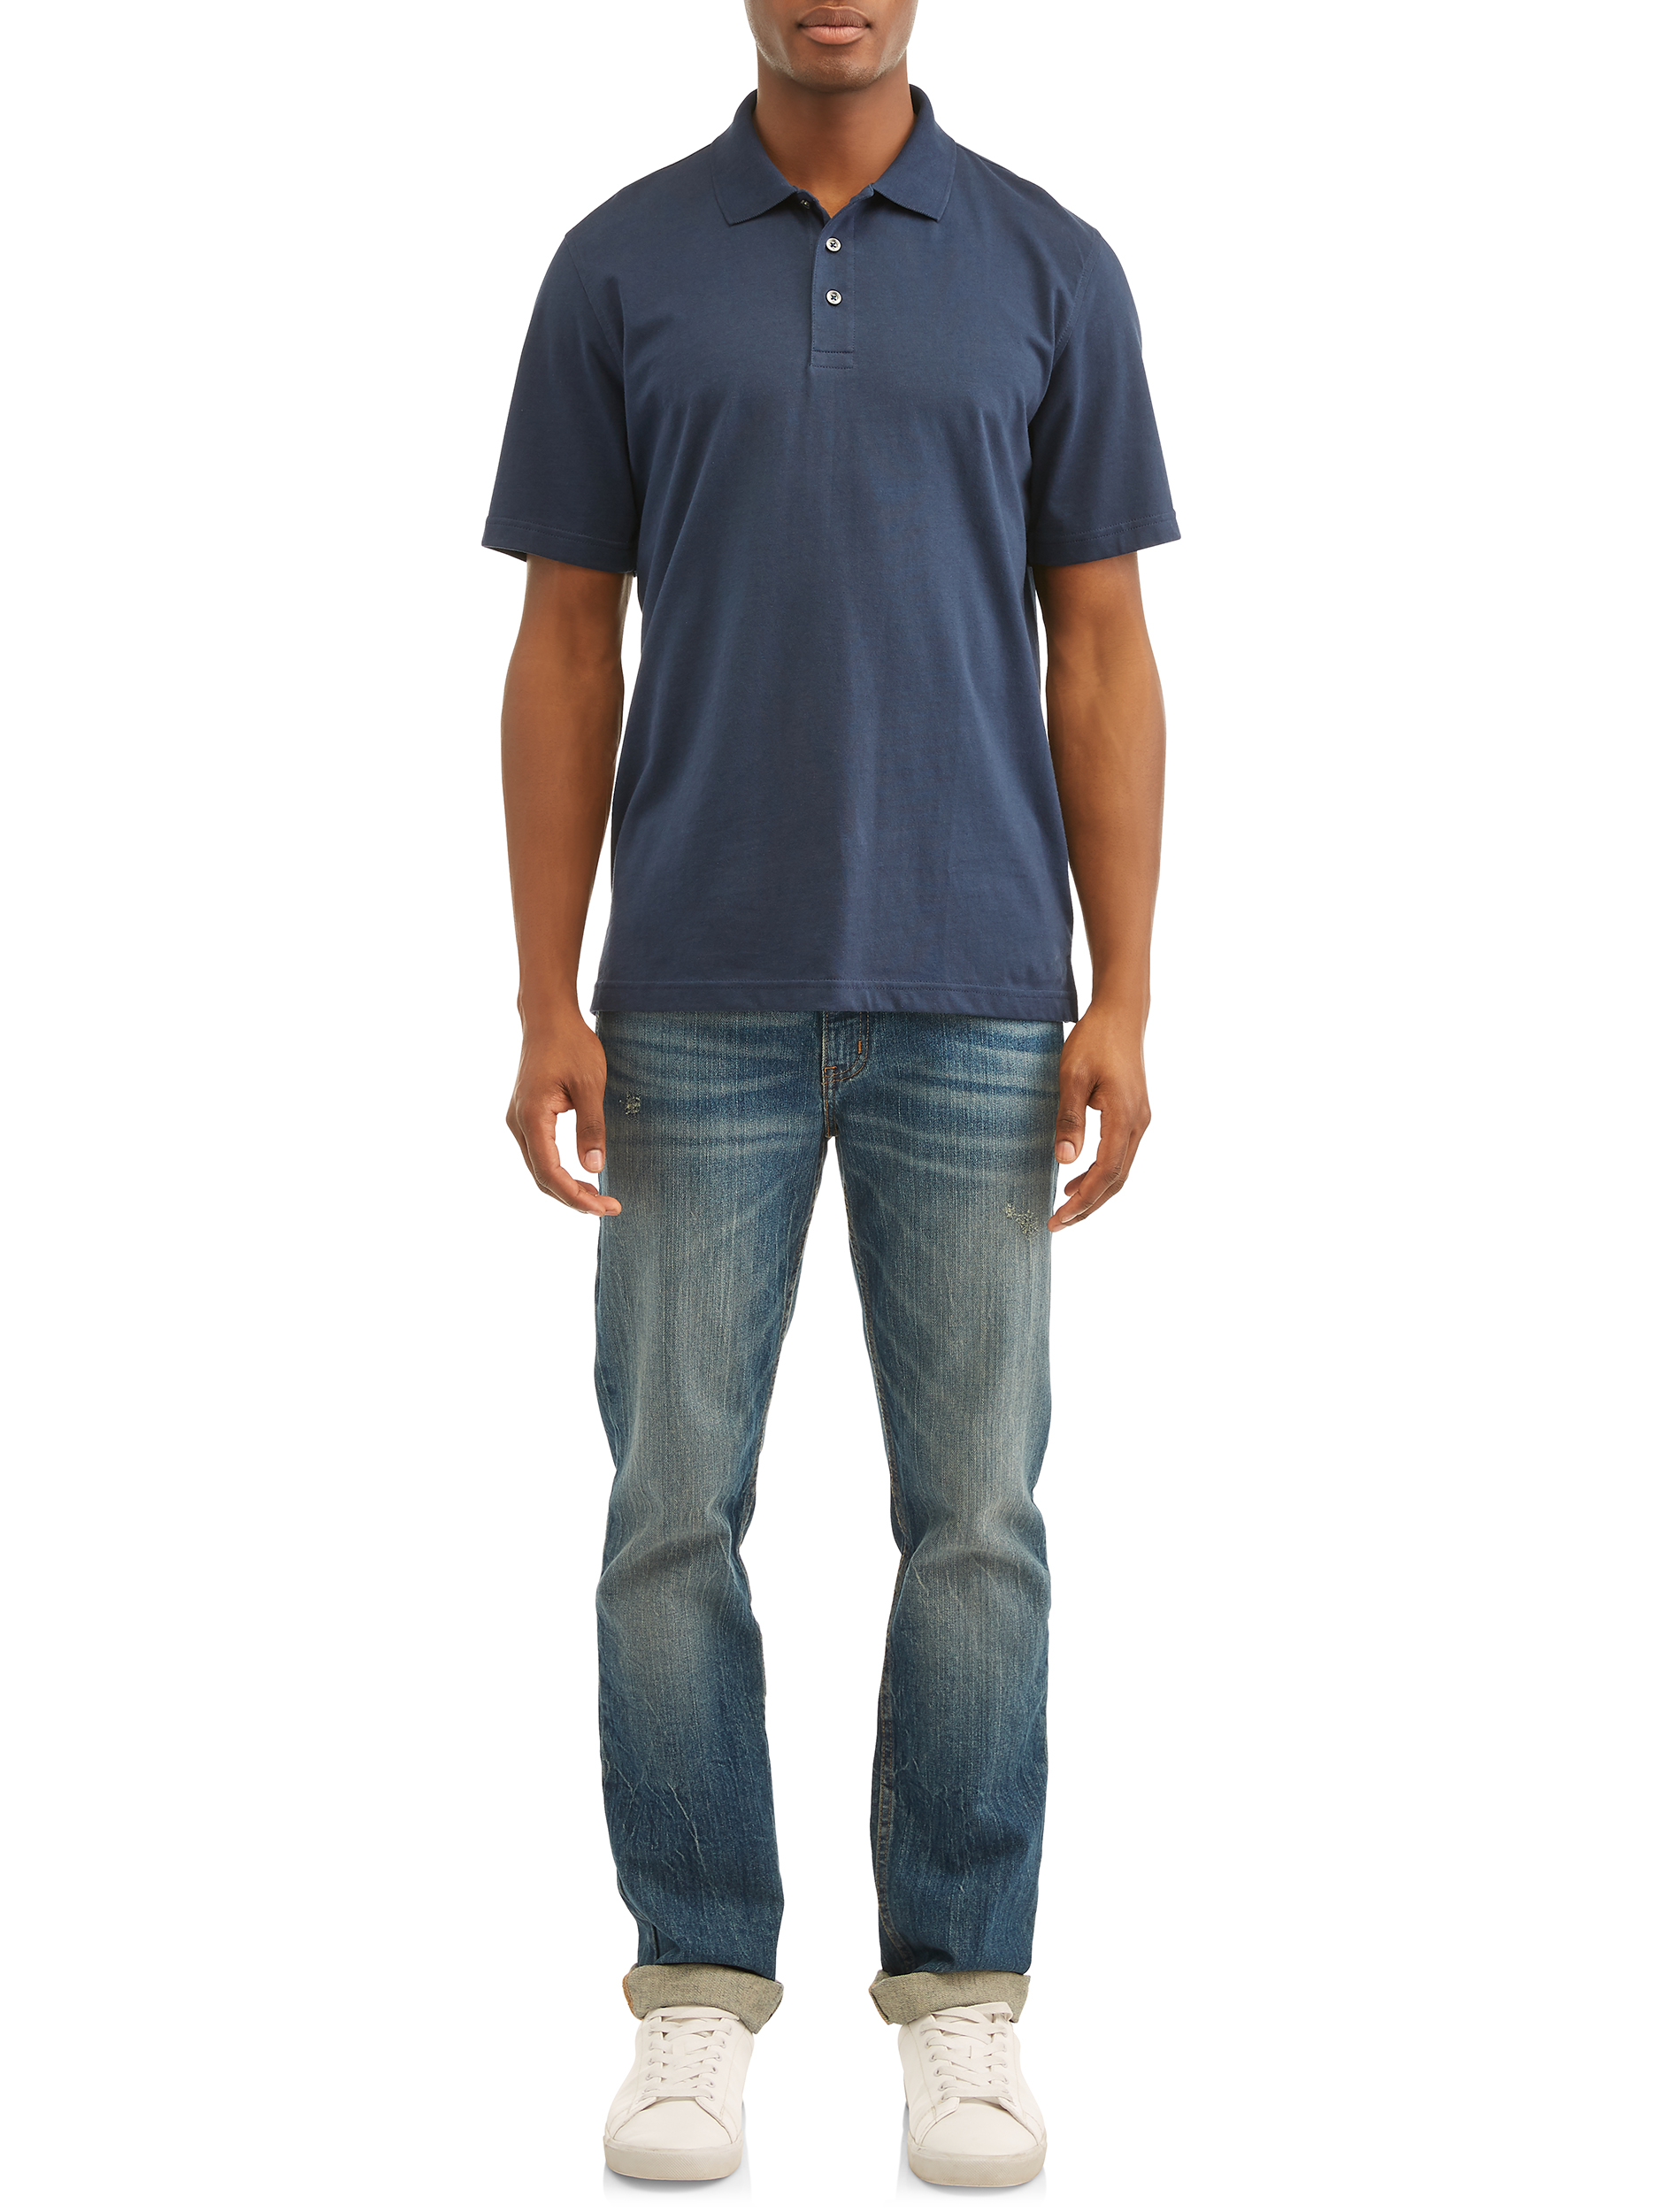 George Men's Short Sleeve Solid Polo Shirt - image 4 of 4